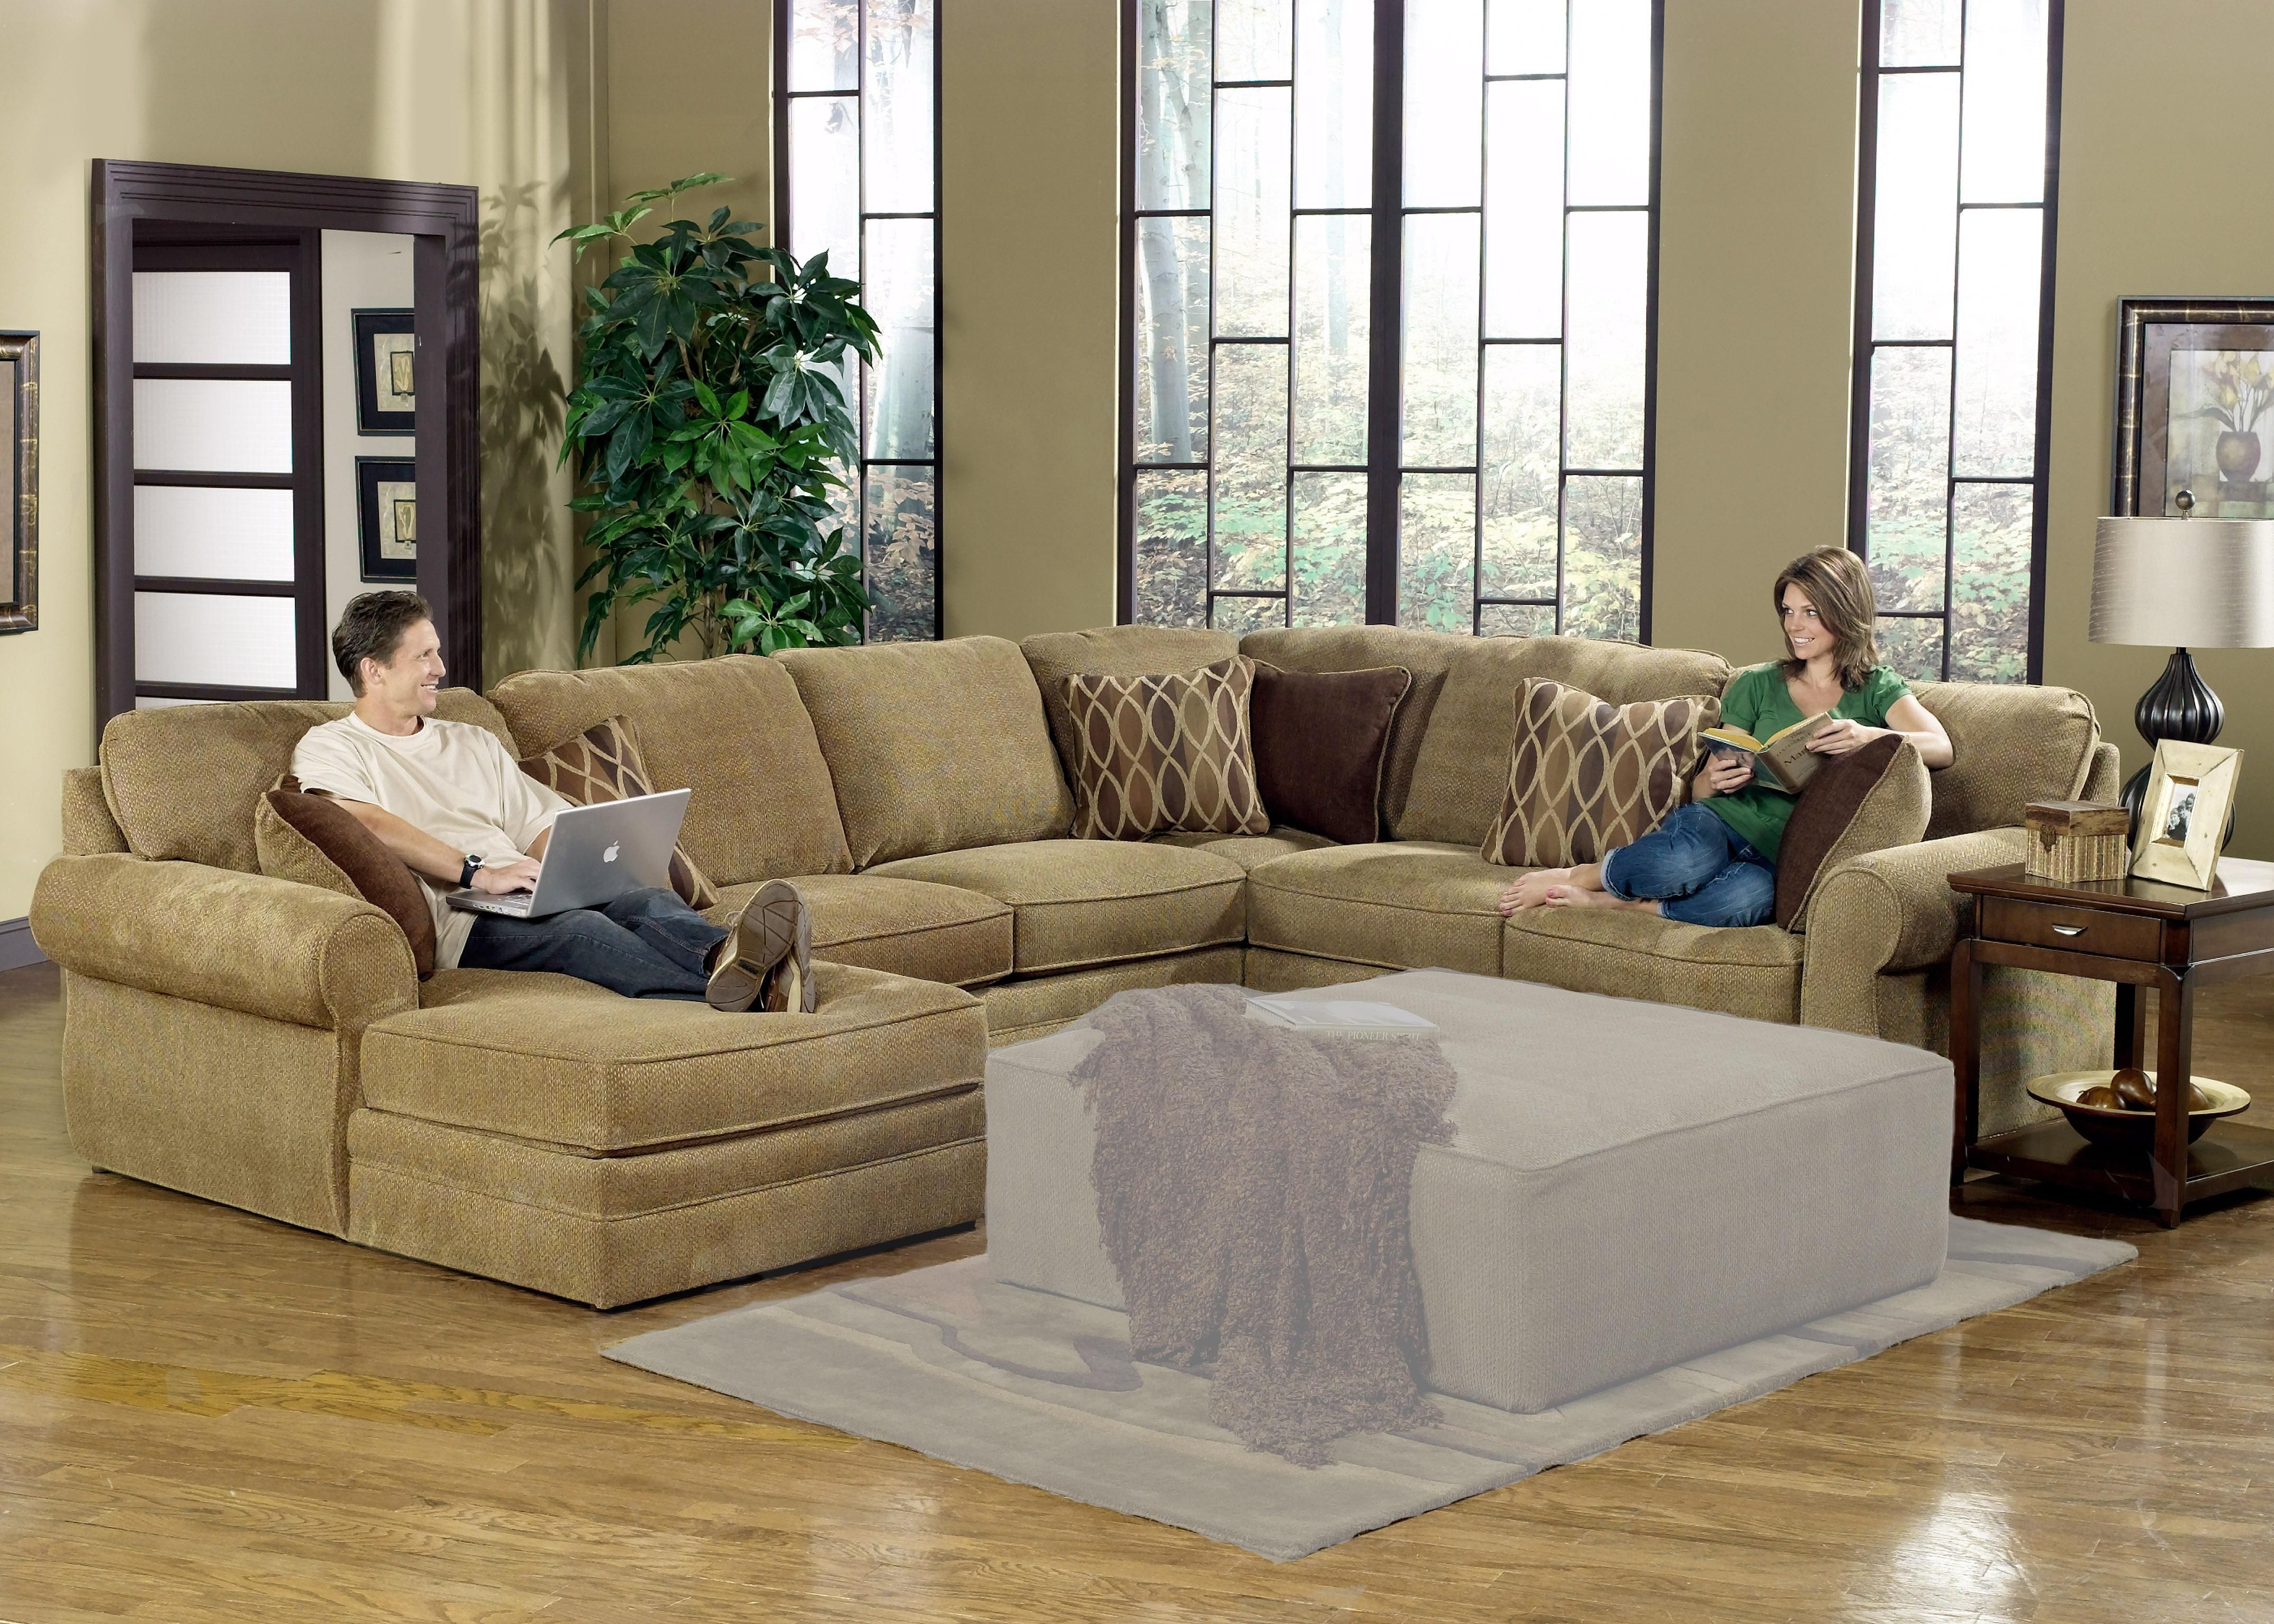 Modern Style U Shaped Sectional Sofa With Home Living Room Sofas And Intended For U Shaped Sectionals (View 8 of 15)